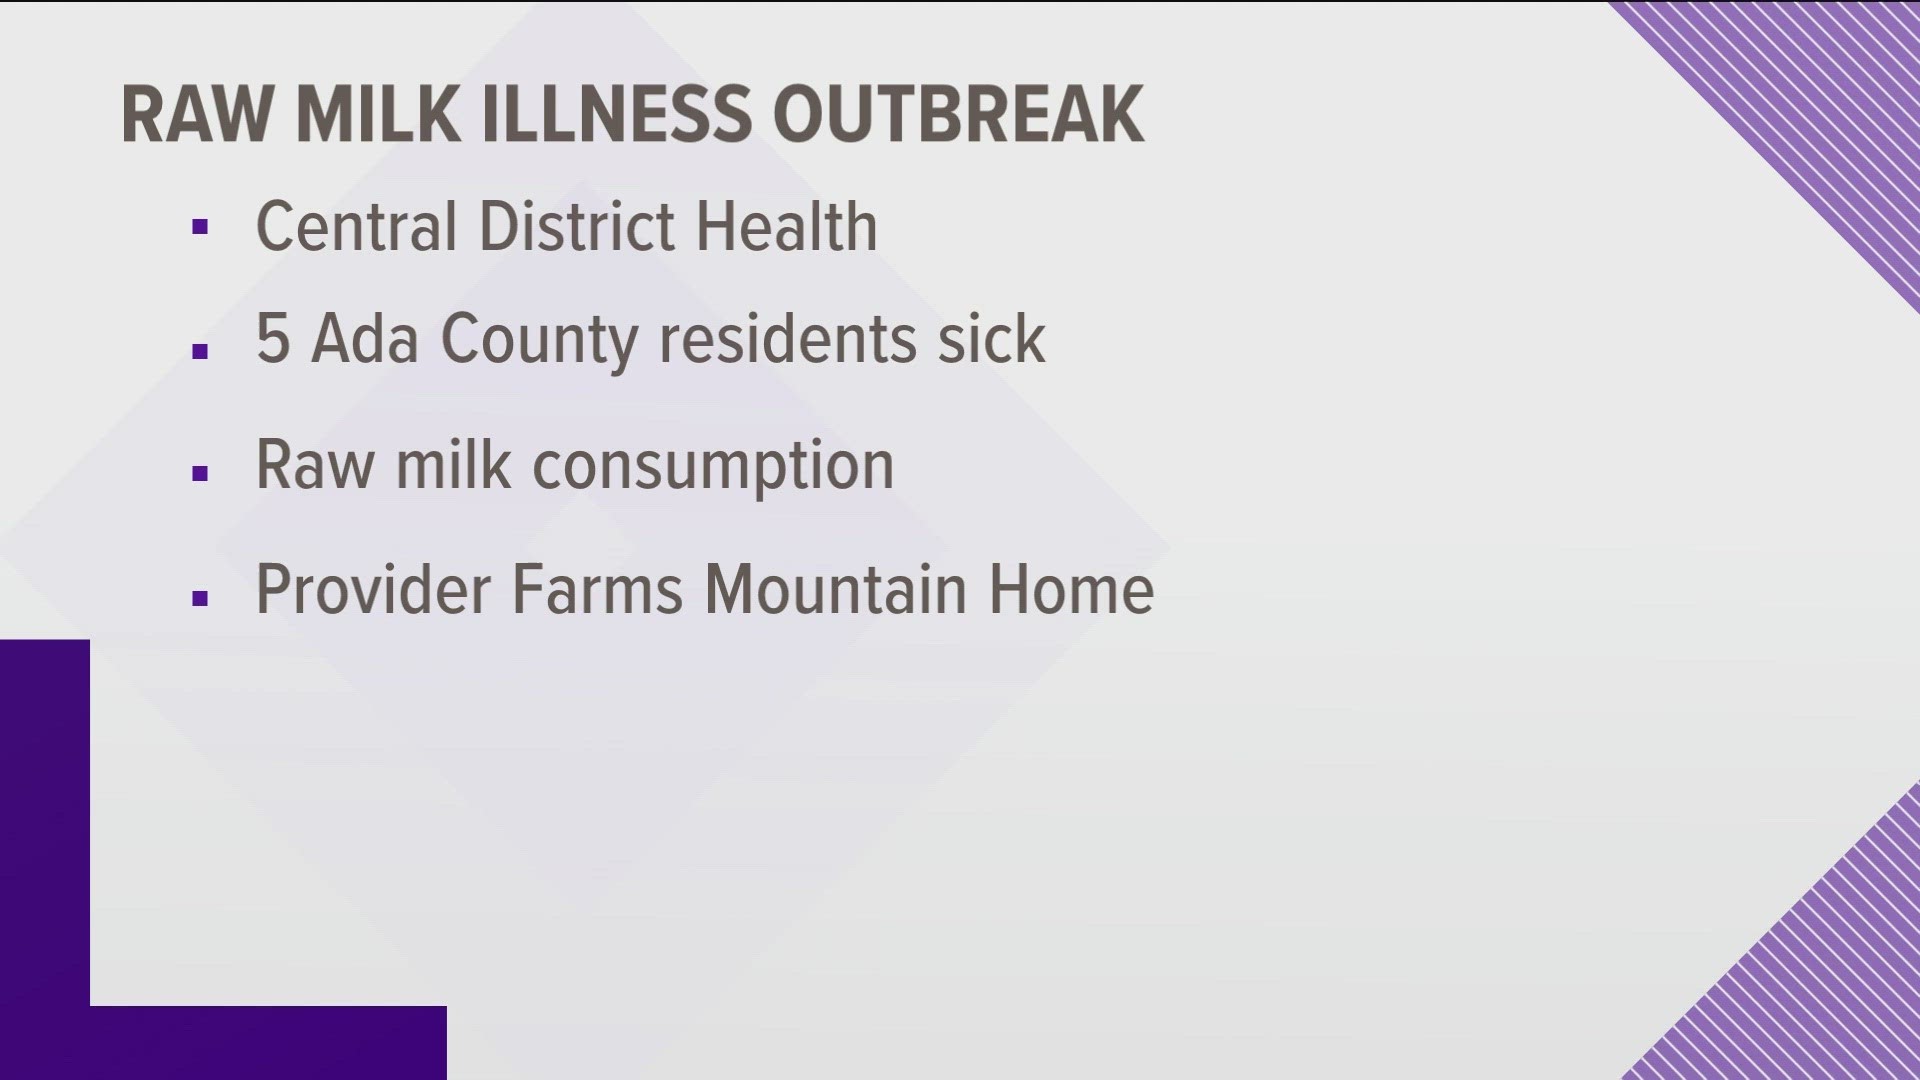 Health officials said three Ada County residents became sick due to drinking raw milk from Provider Farms in Mountain Home.